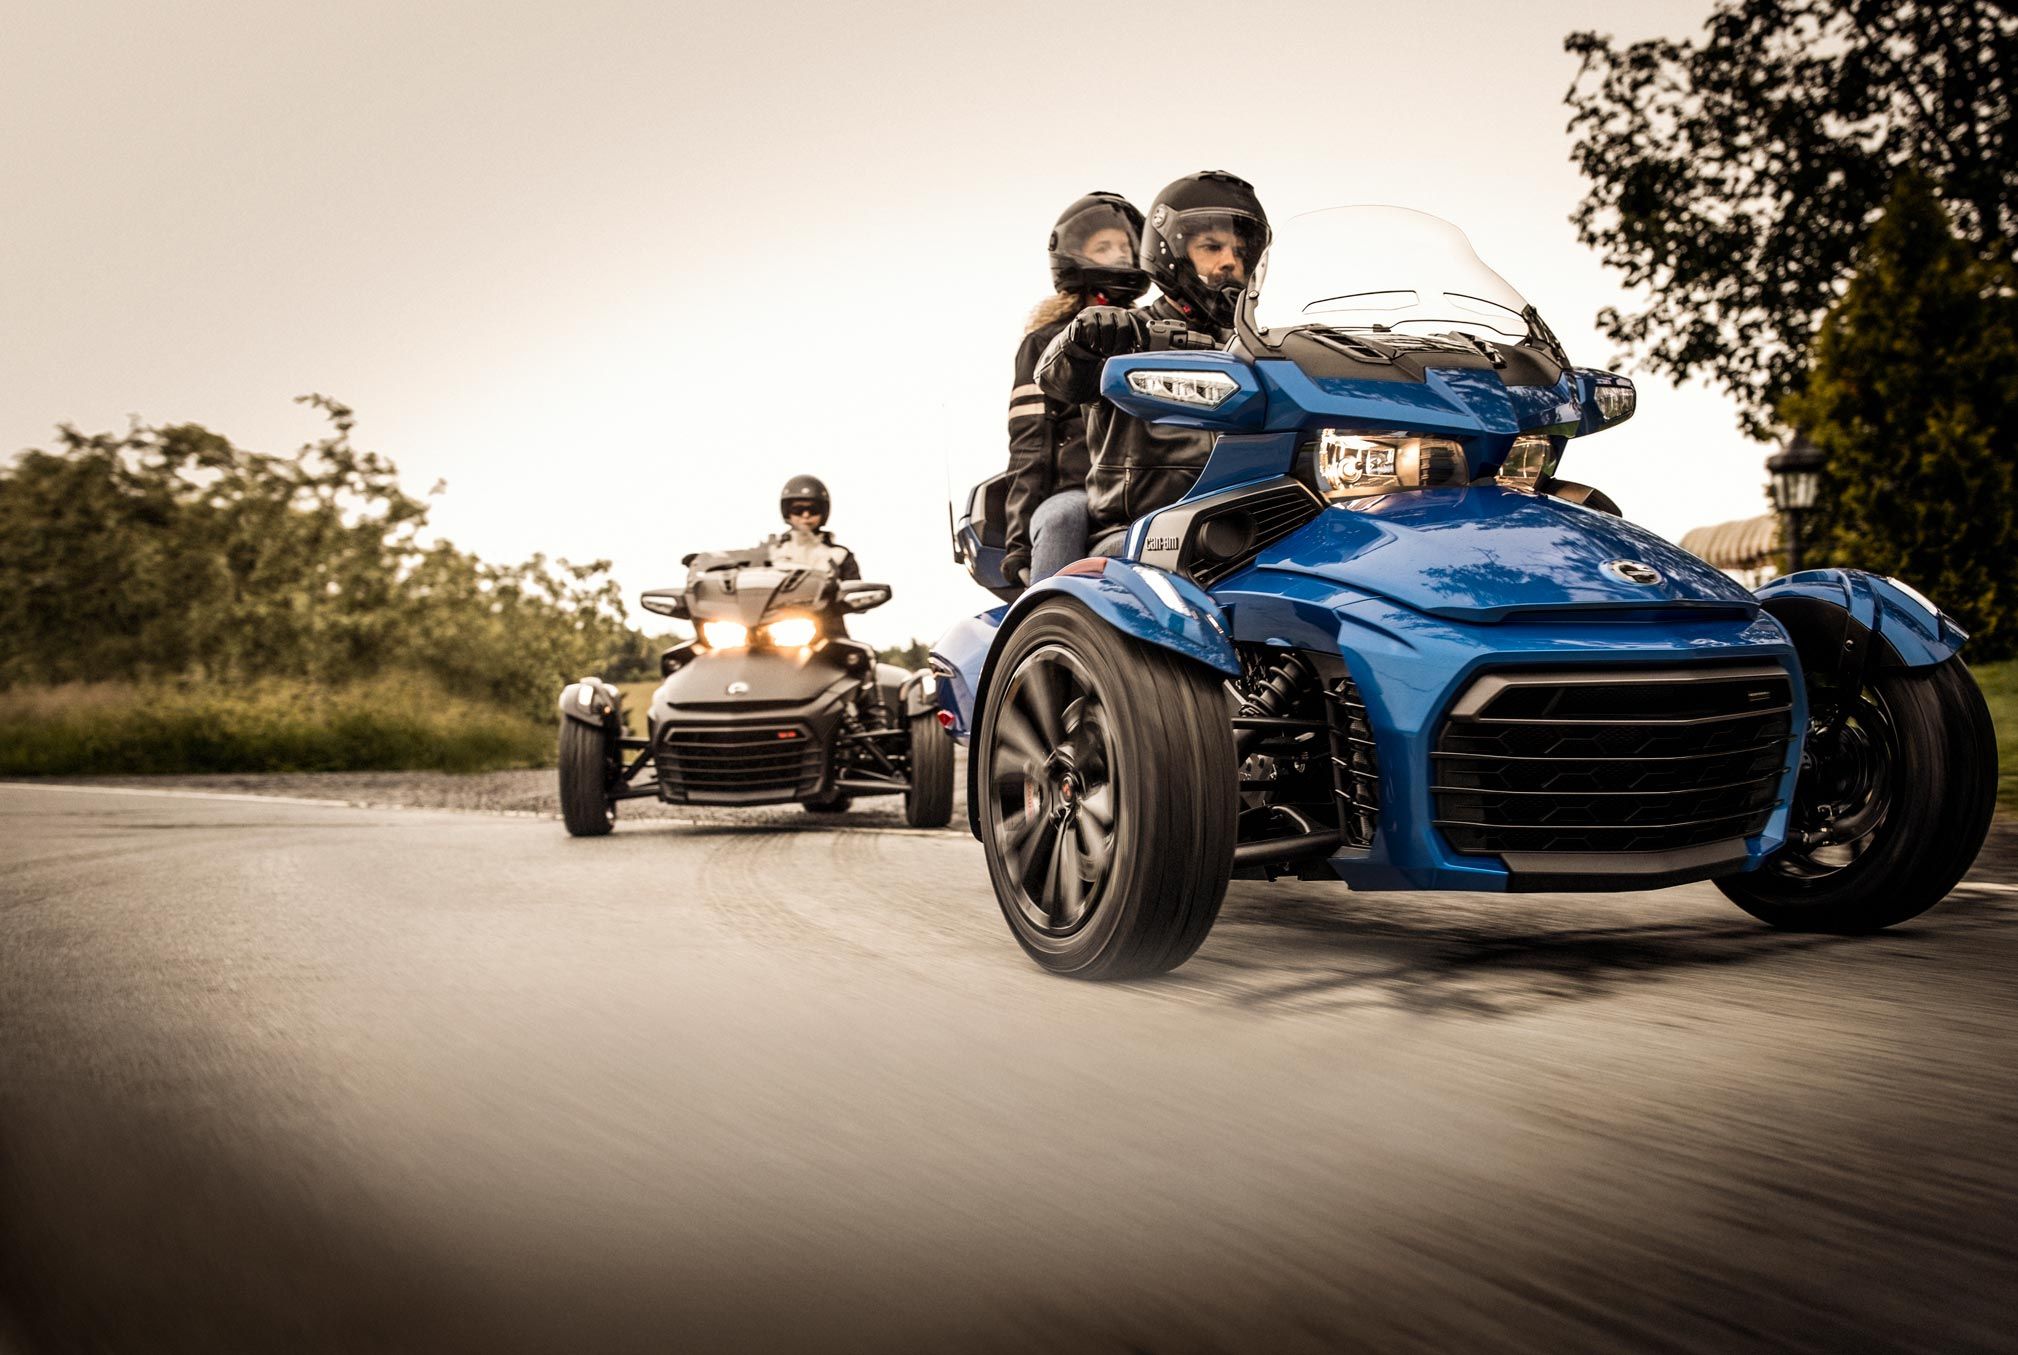 test-riding the BRP Can-Am Spyder F3-T.